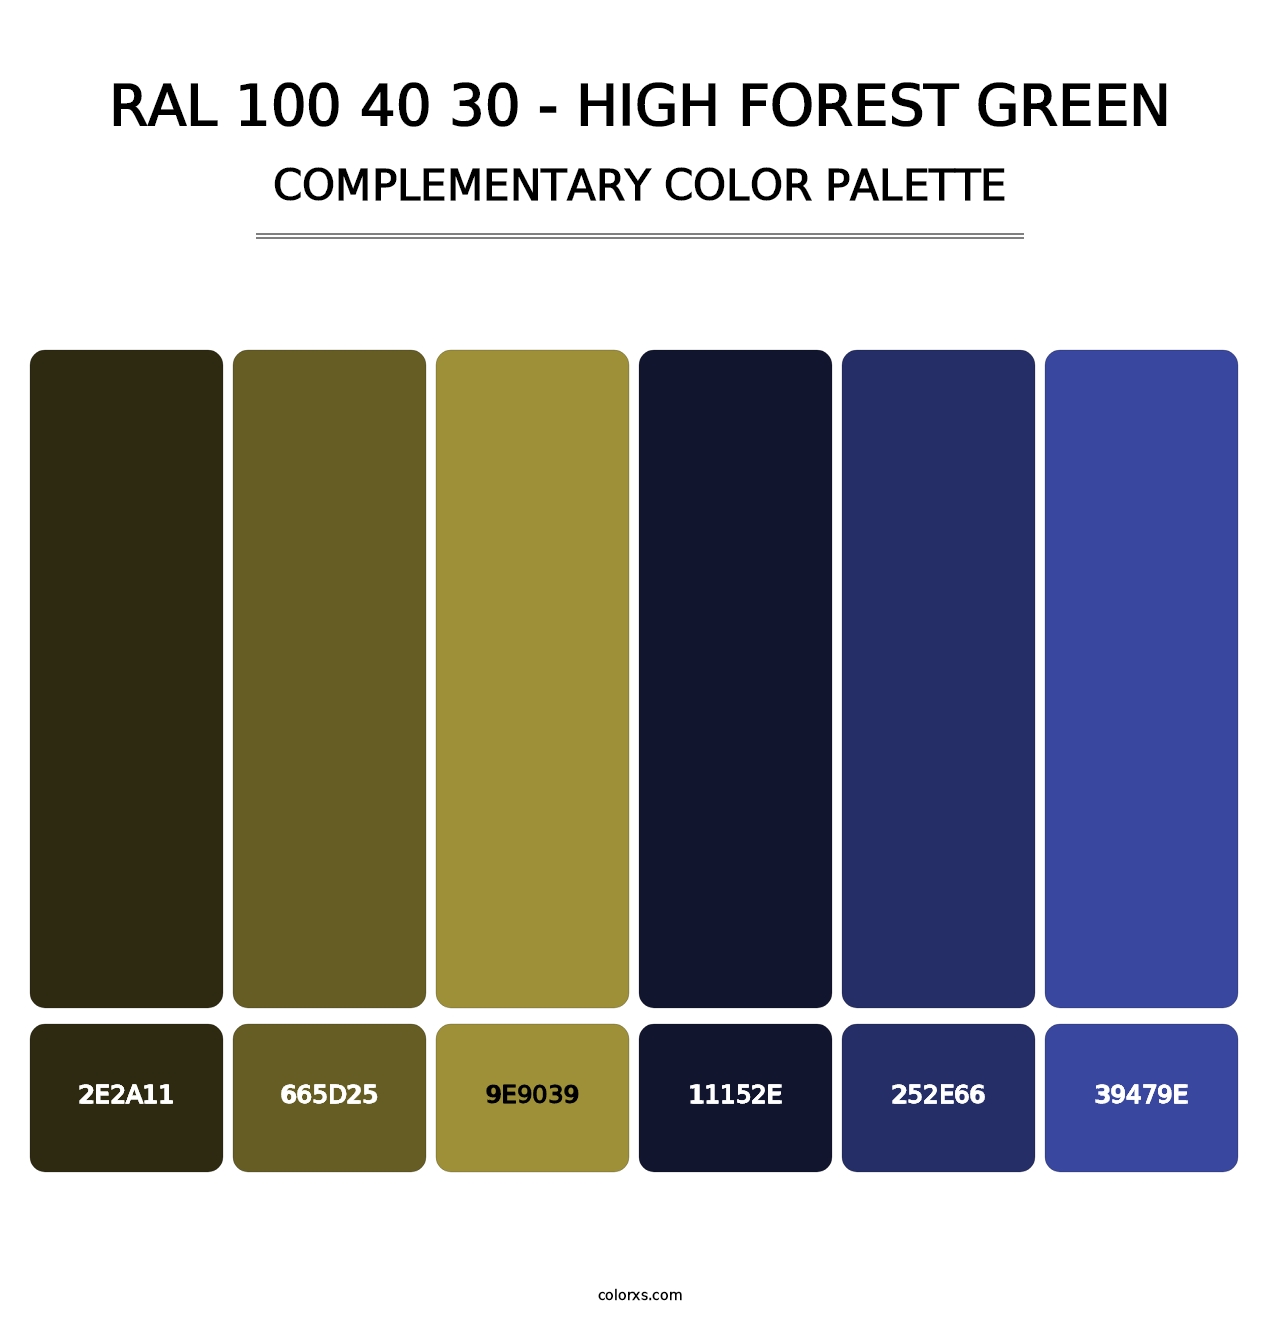 RAL 100 40 30 - High Forest Green - Complementary Color Palette